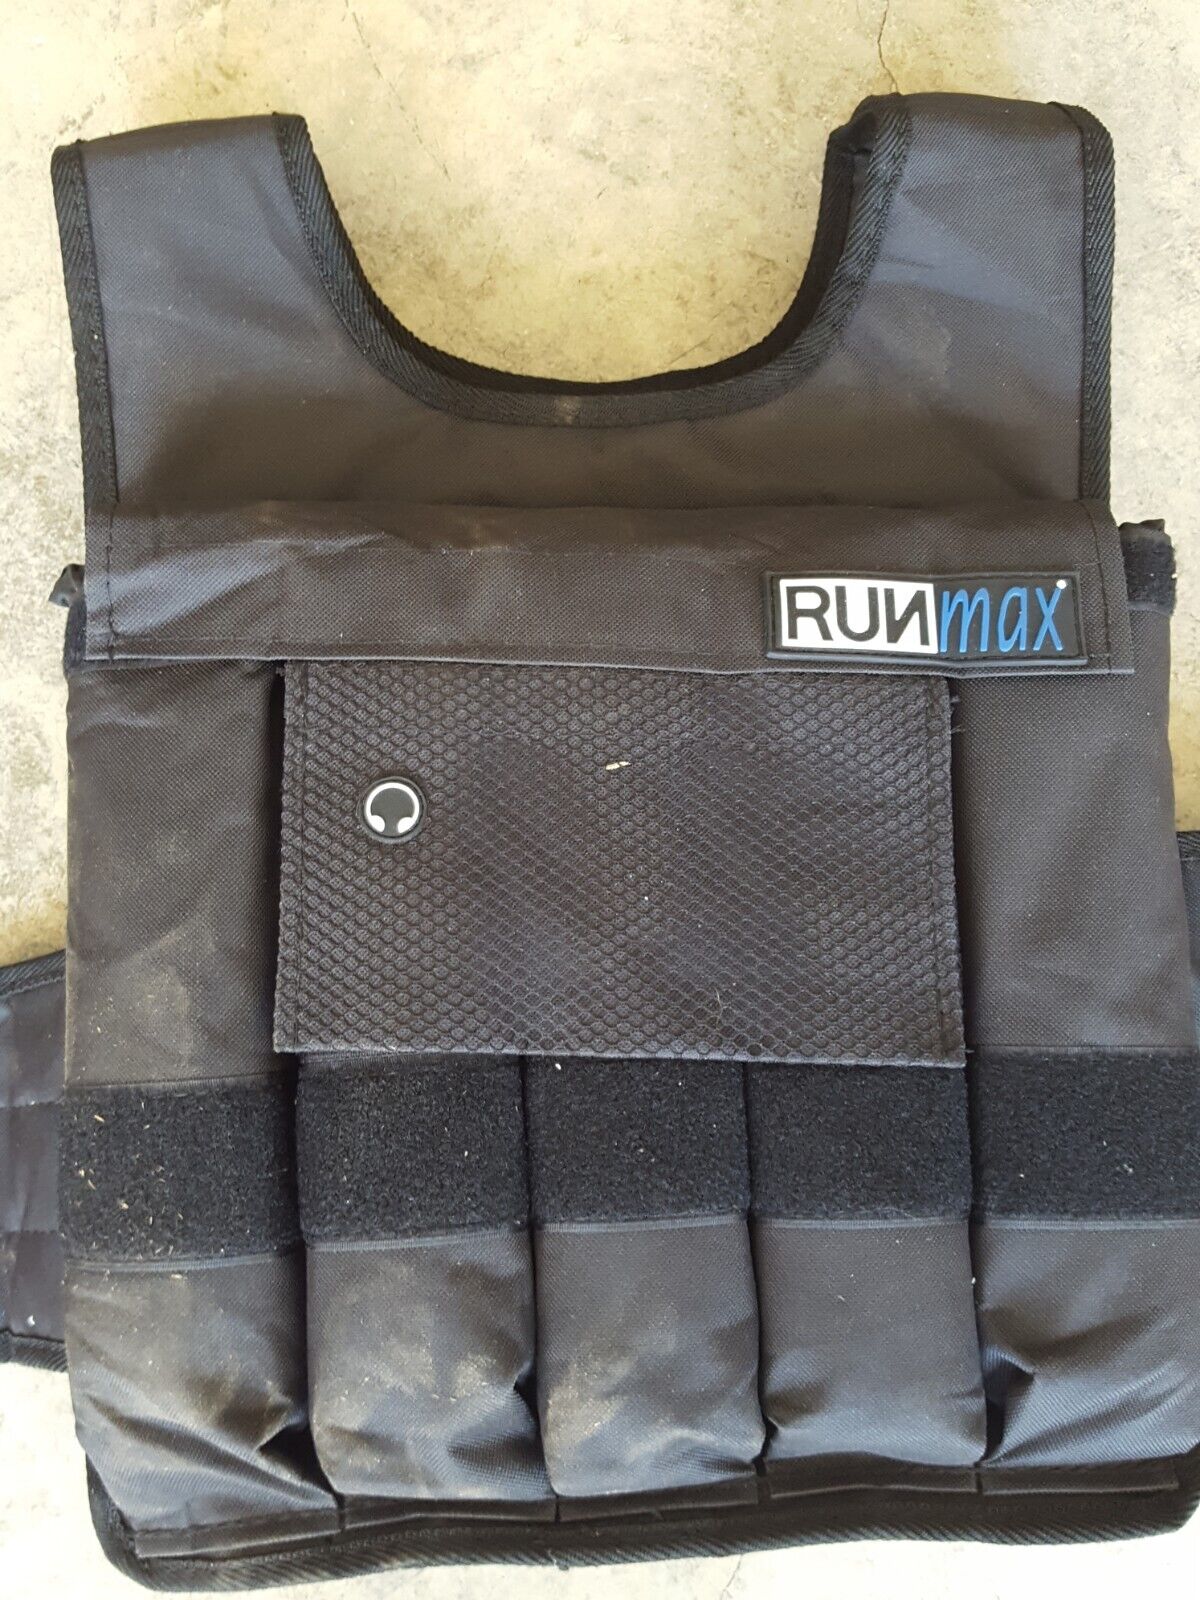 RUNmax Weighted Vest 40LB